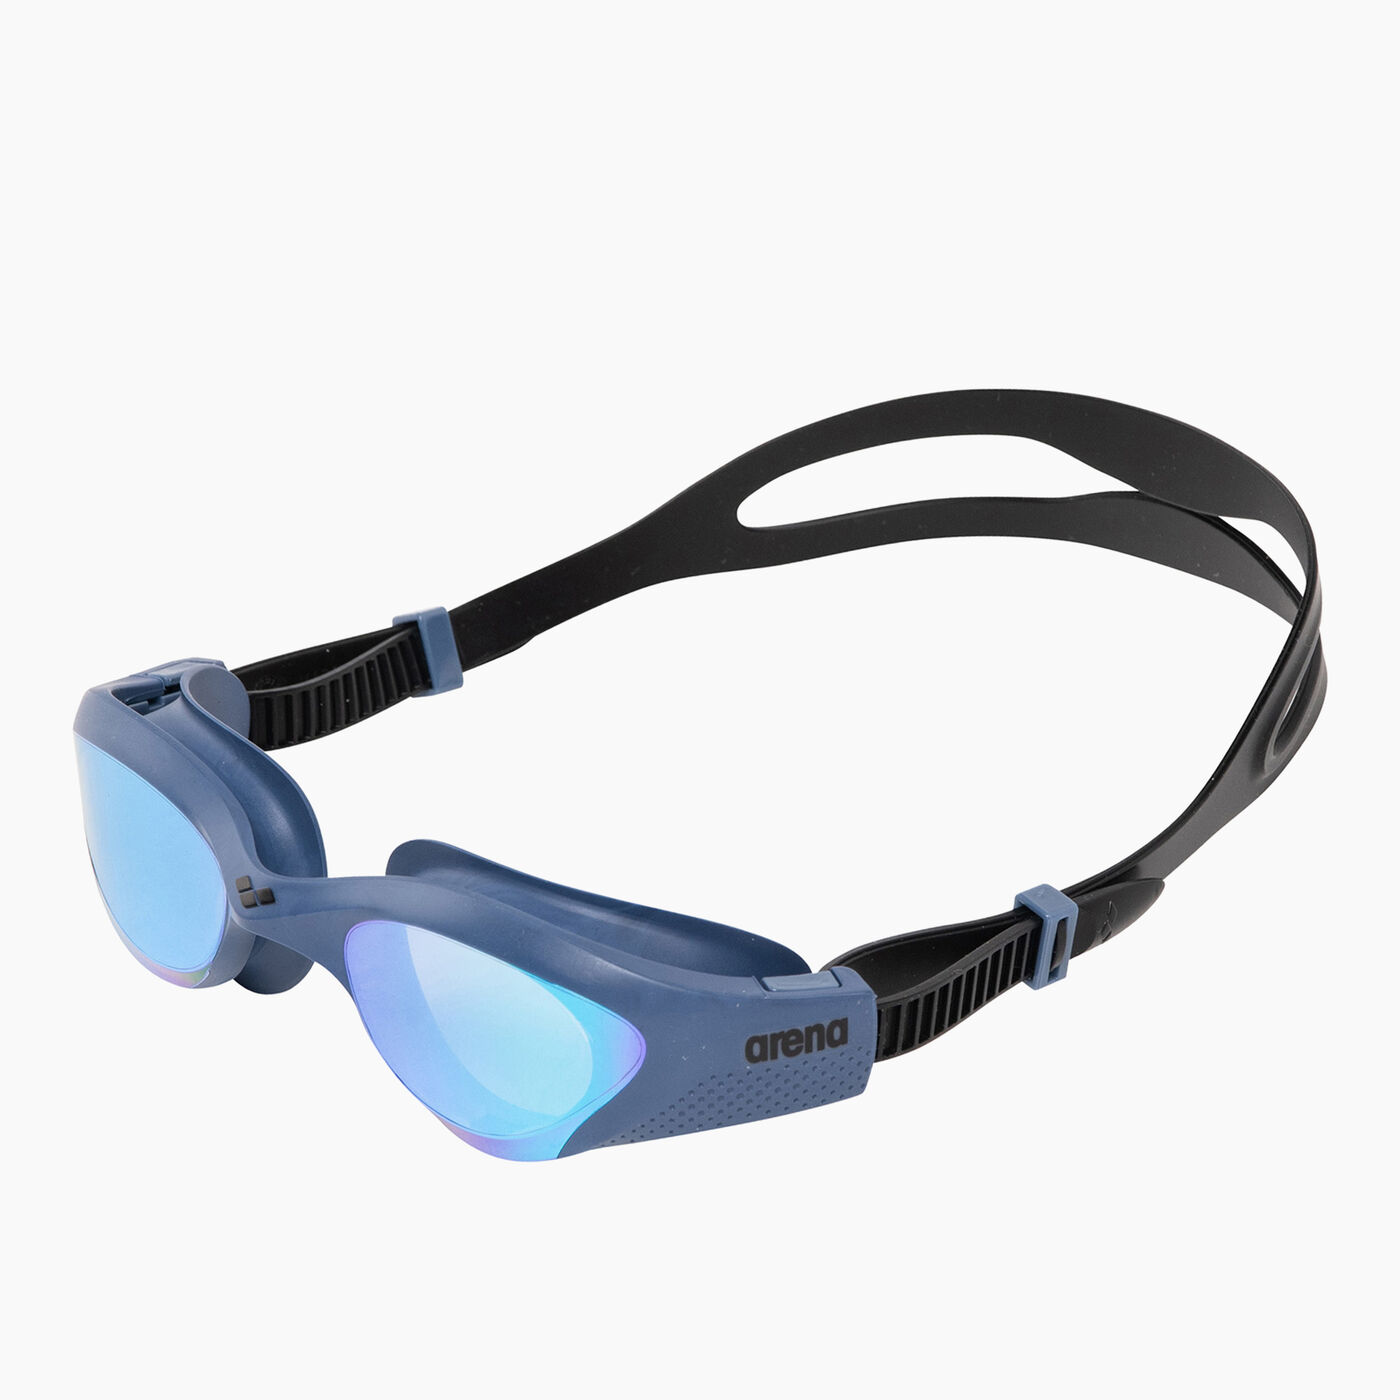 The One Mirror Swimming Goggles